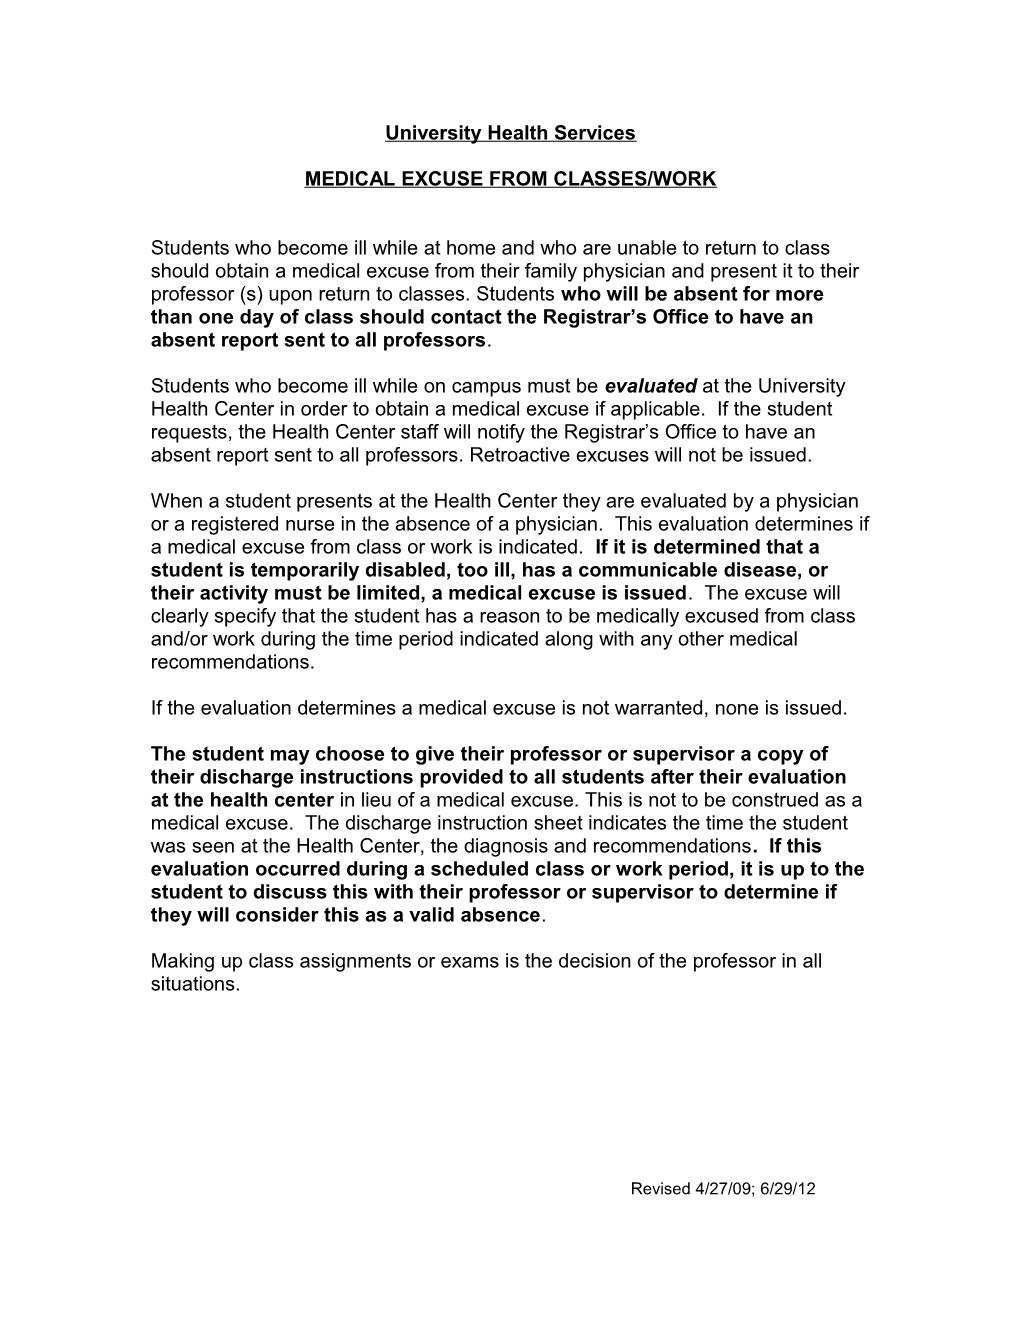 Medical Excuse from Classes/Work